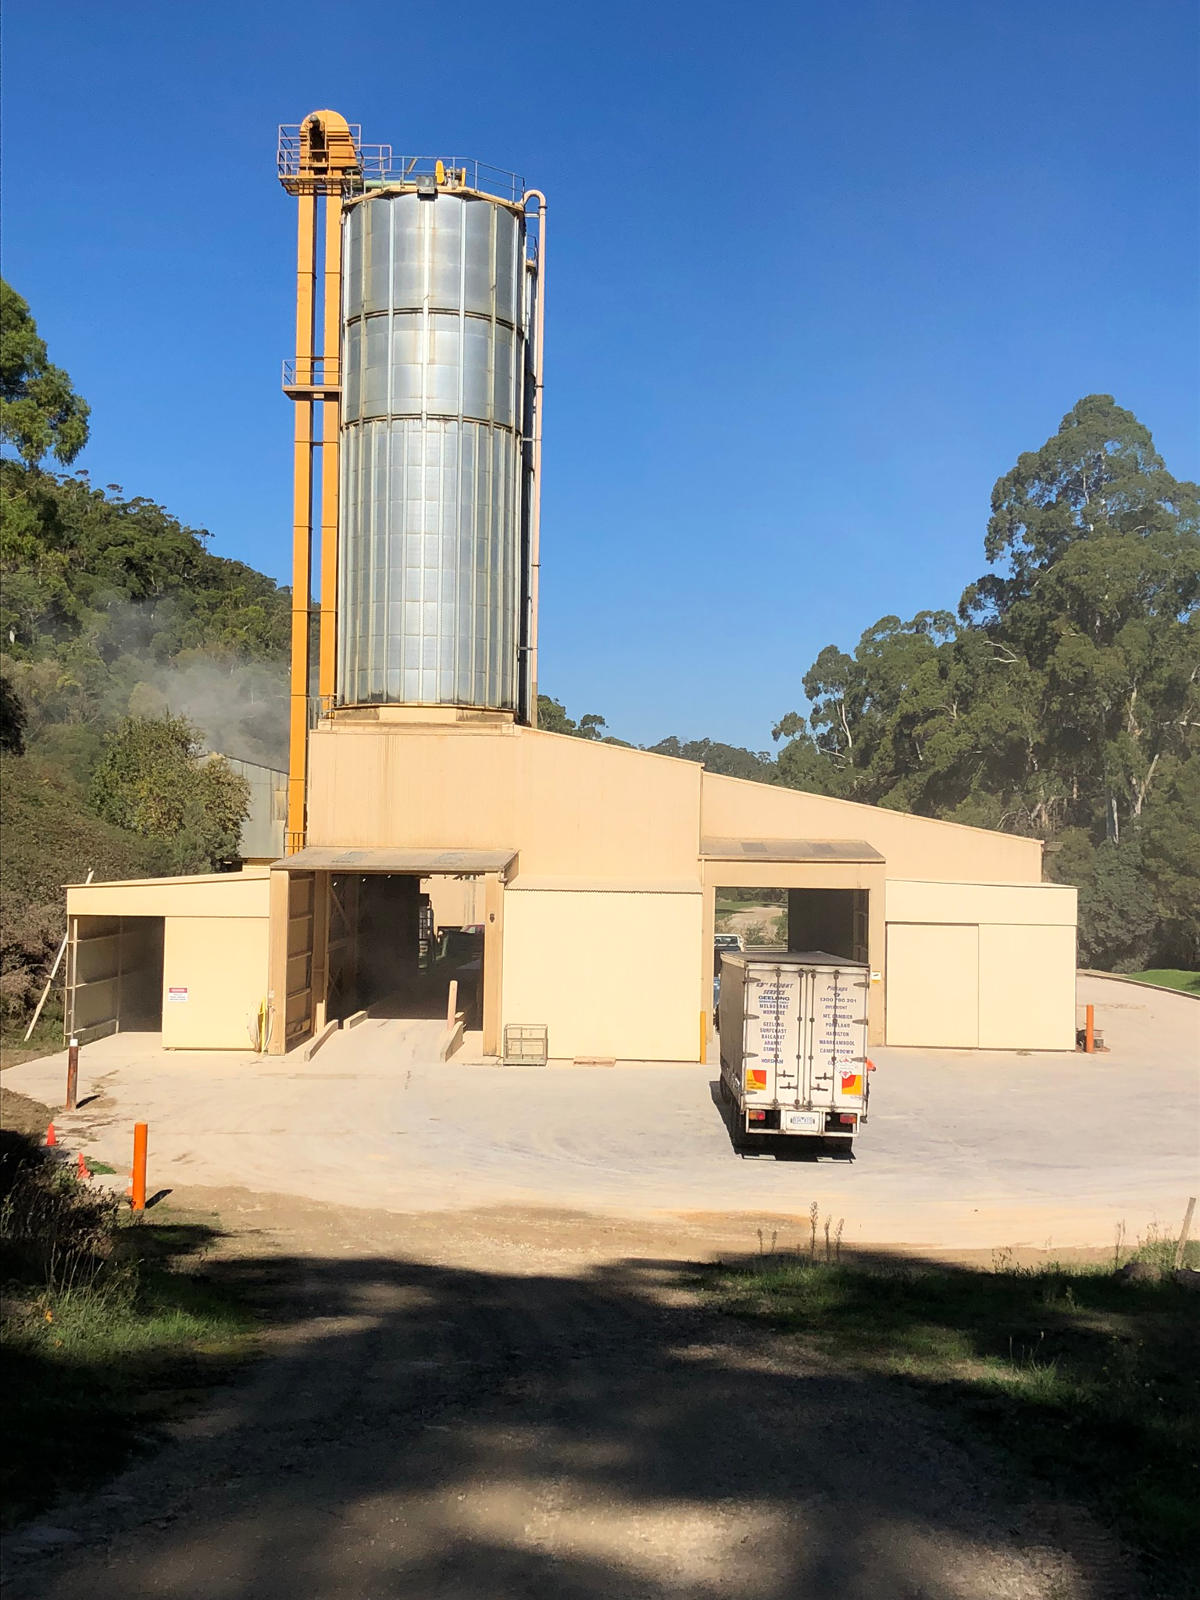 Storage silo for lime